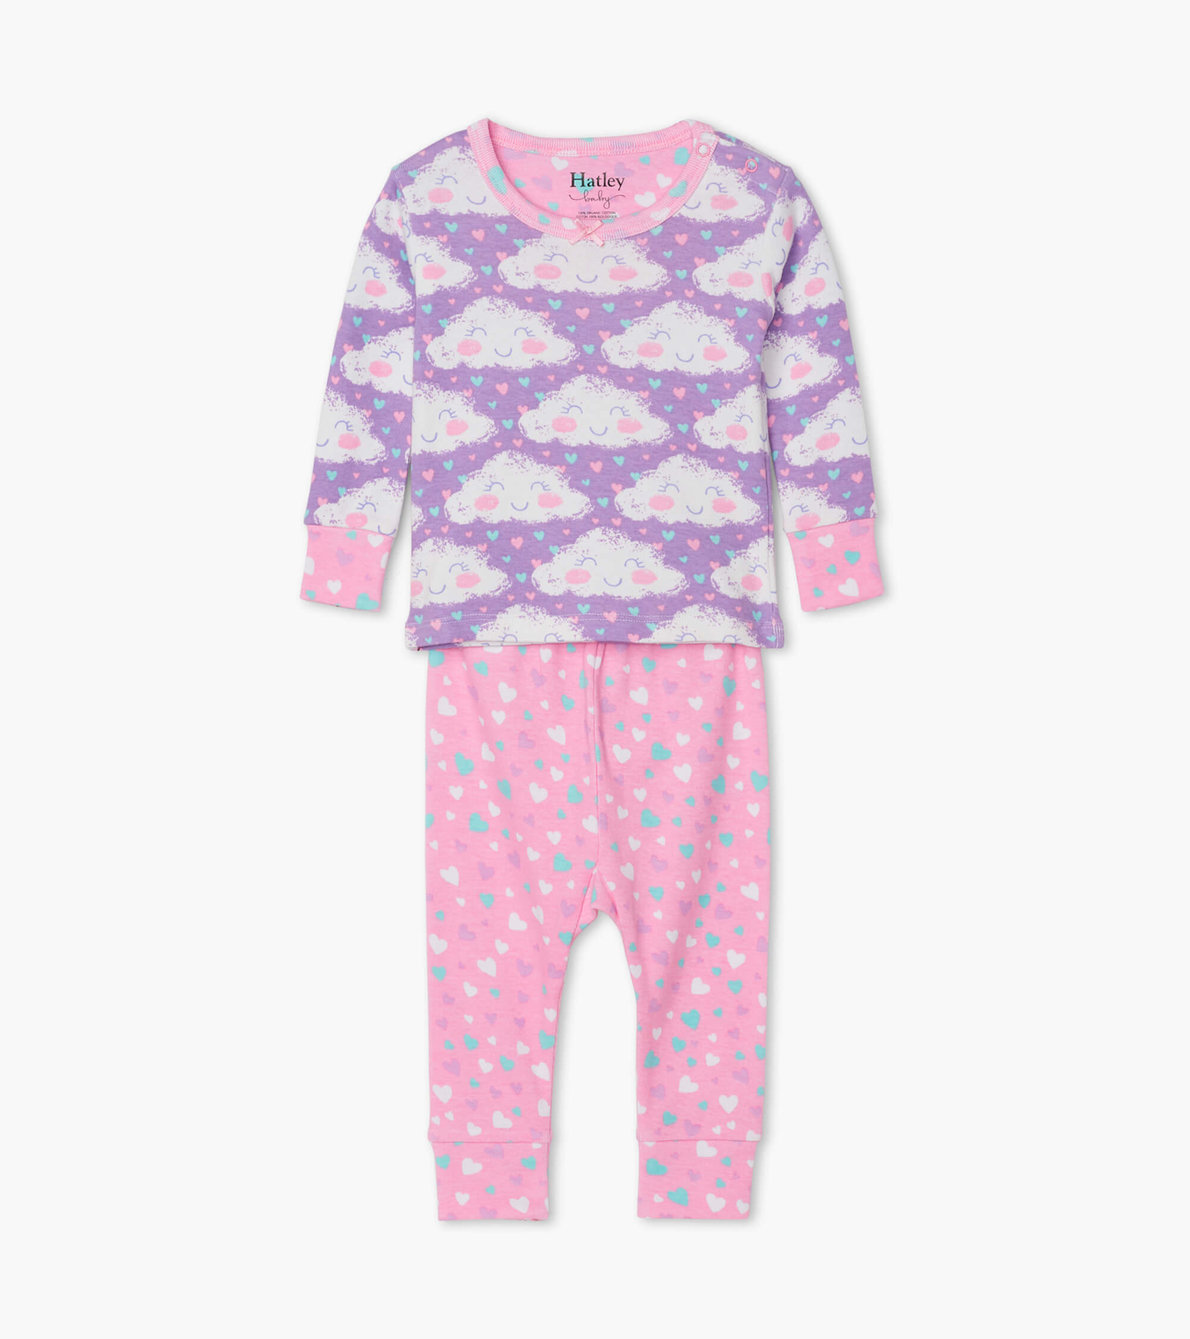 View larger image of Cheerful Clouds Organic Cotton Baby Pajama Set